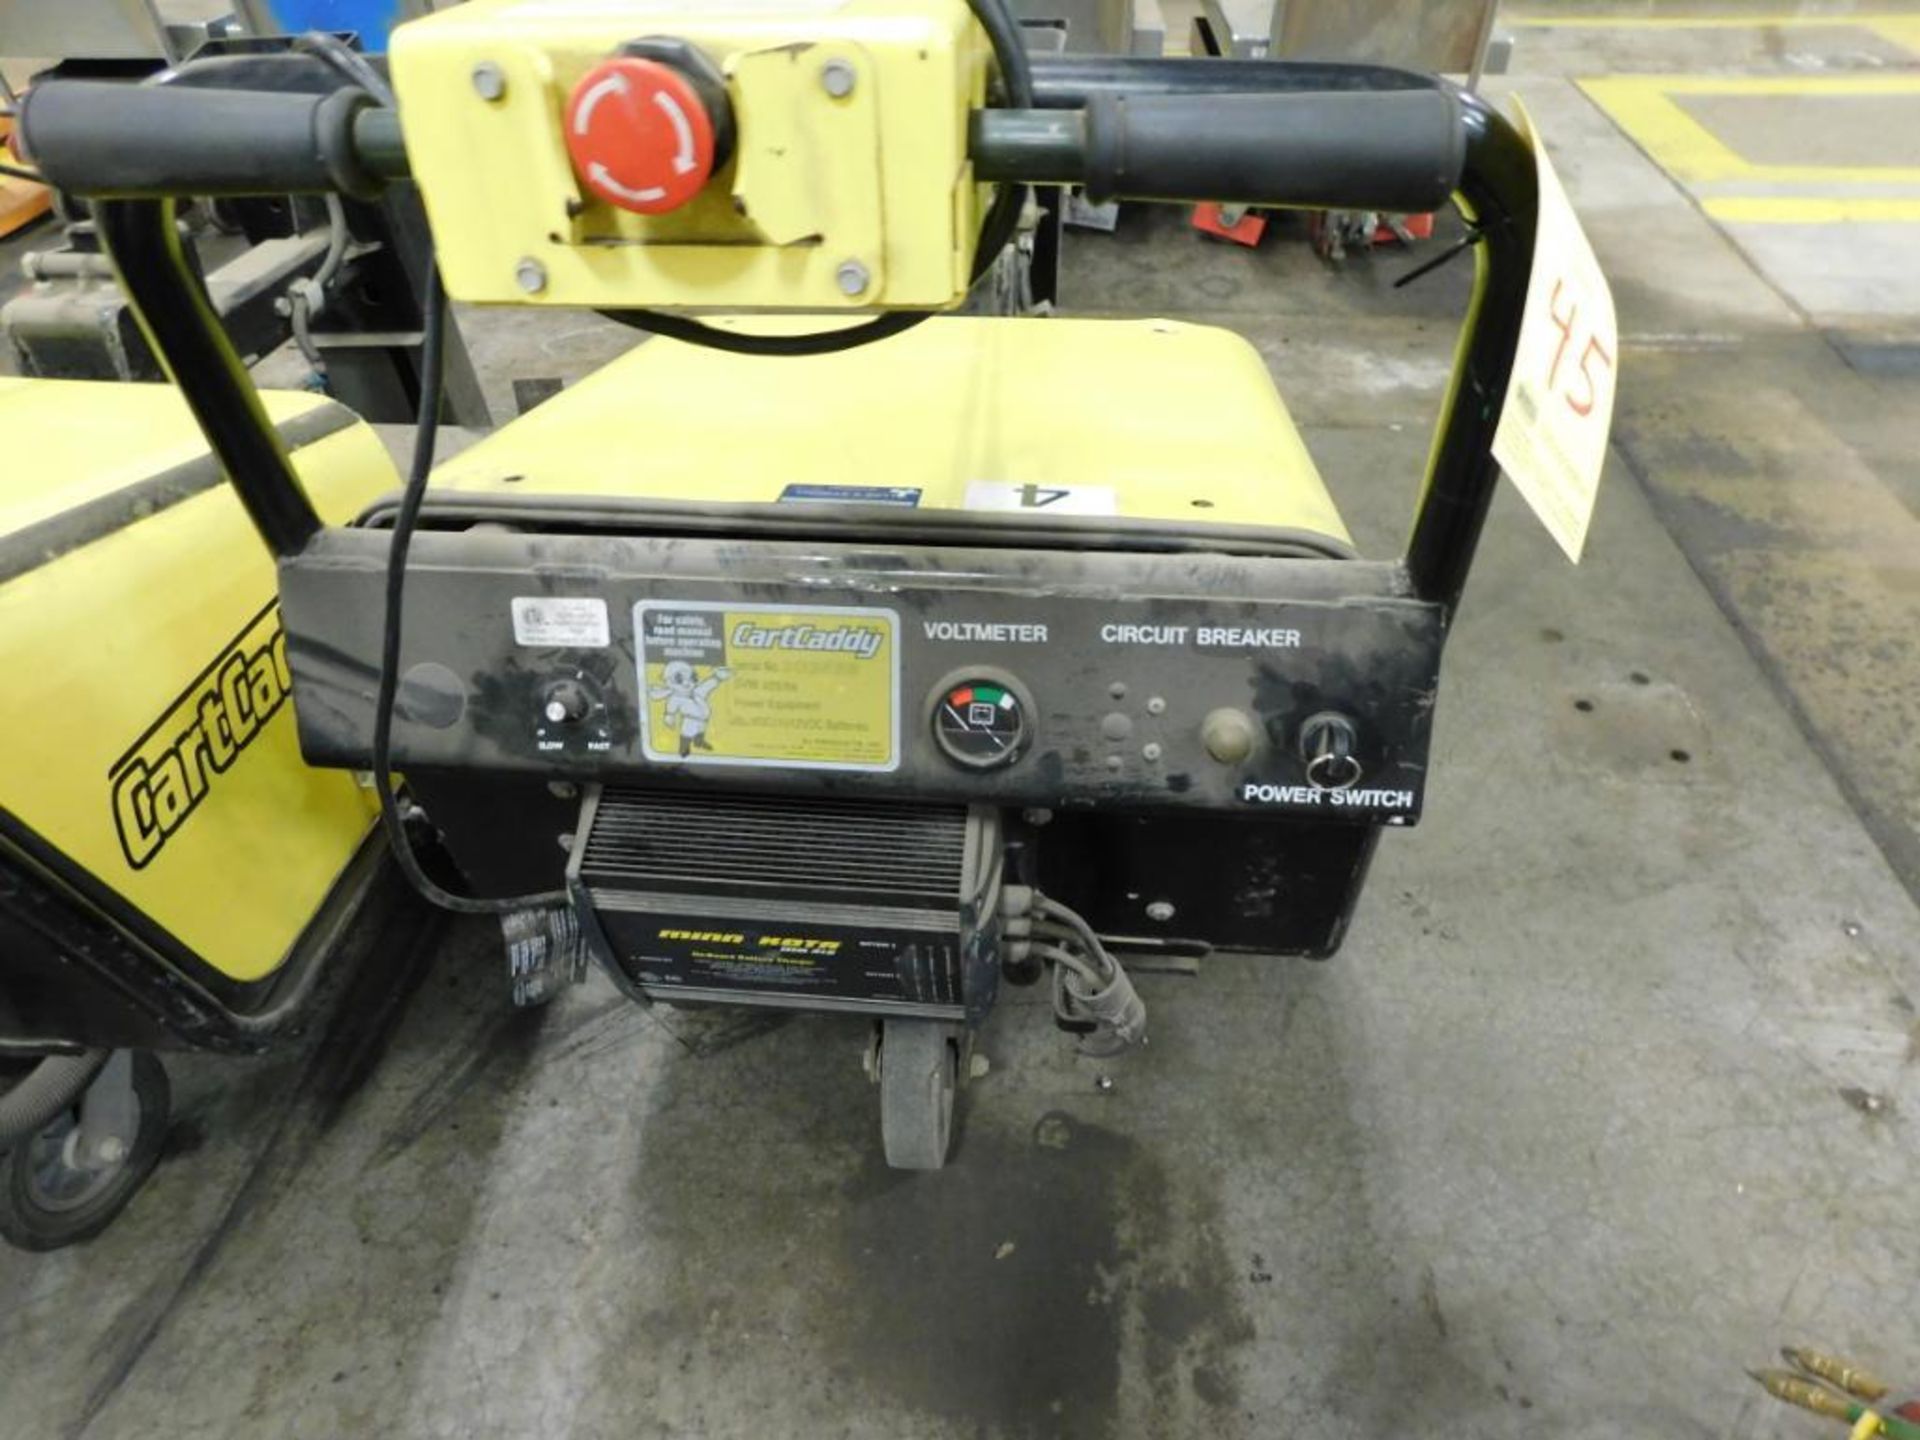 ELECTRIC CART PUSHER, CART CADDY 5W, 36 v., w/onboard charger - Image 2 of 3